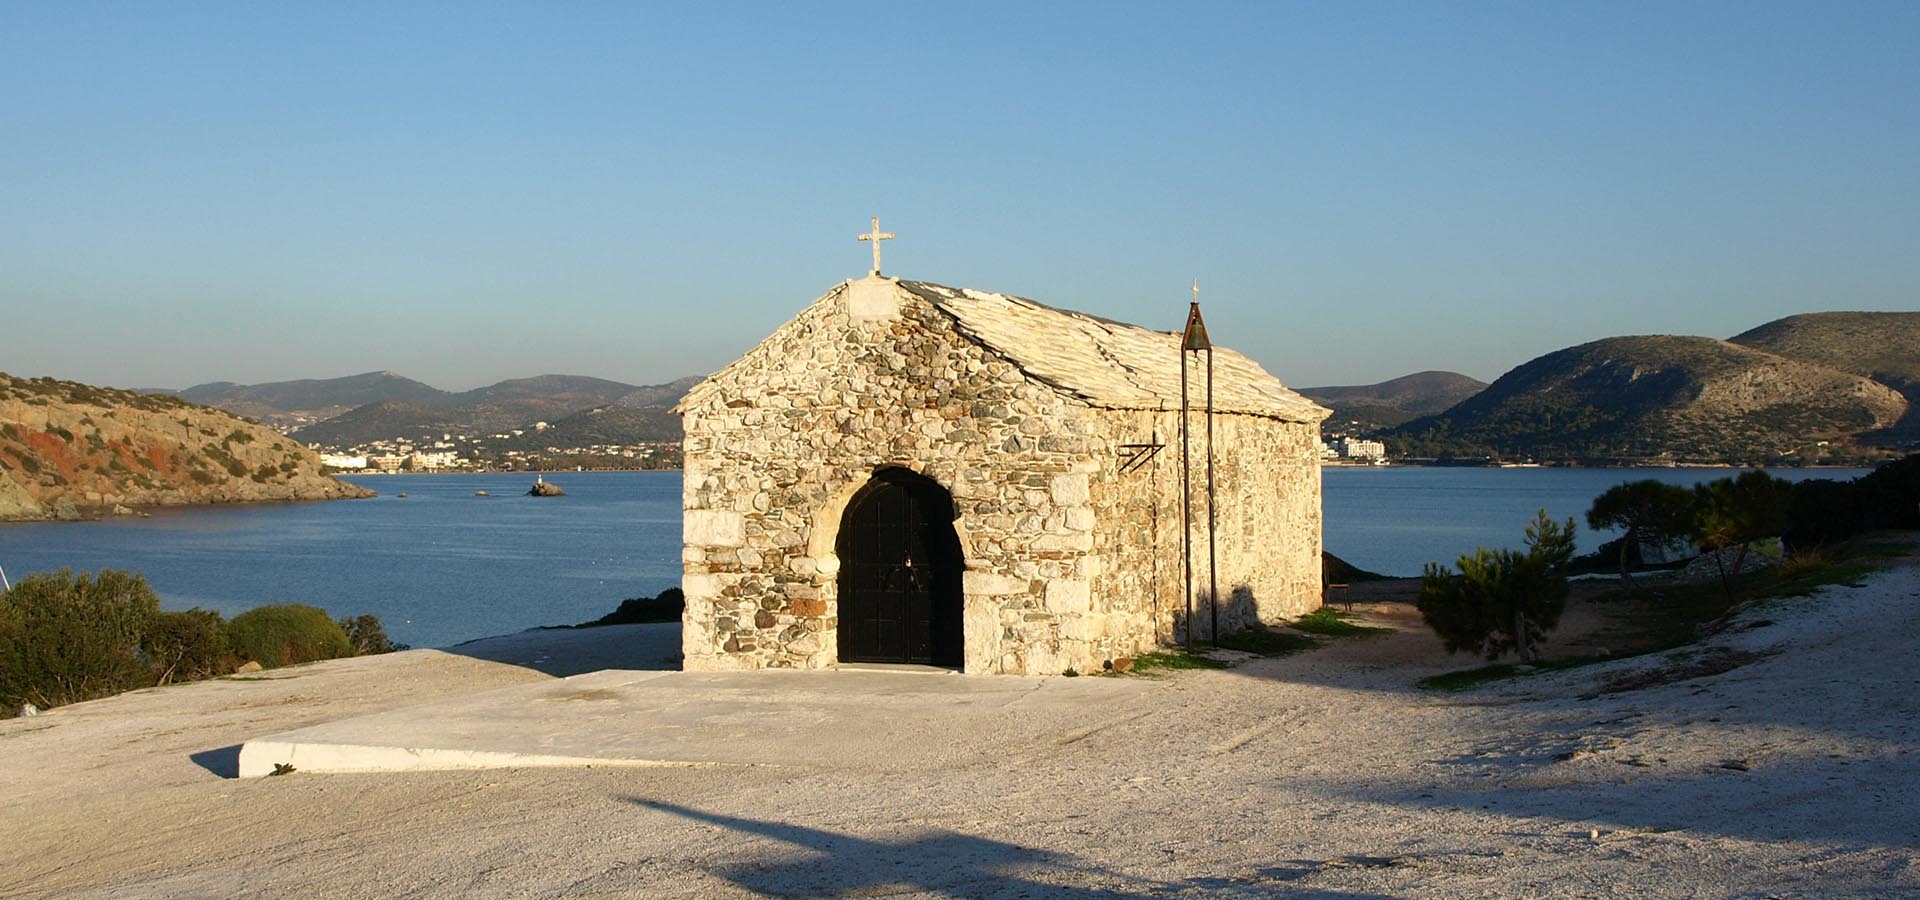 greek churches to get married